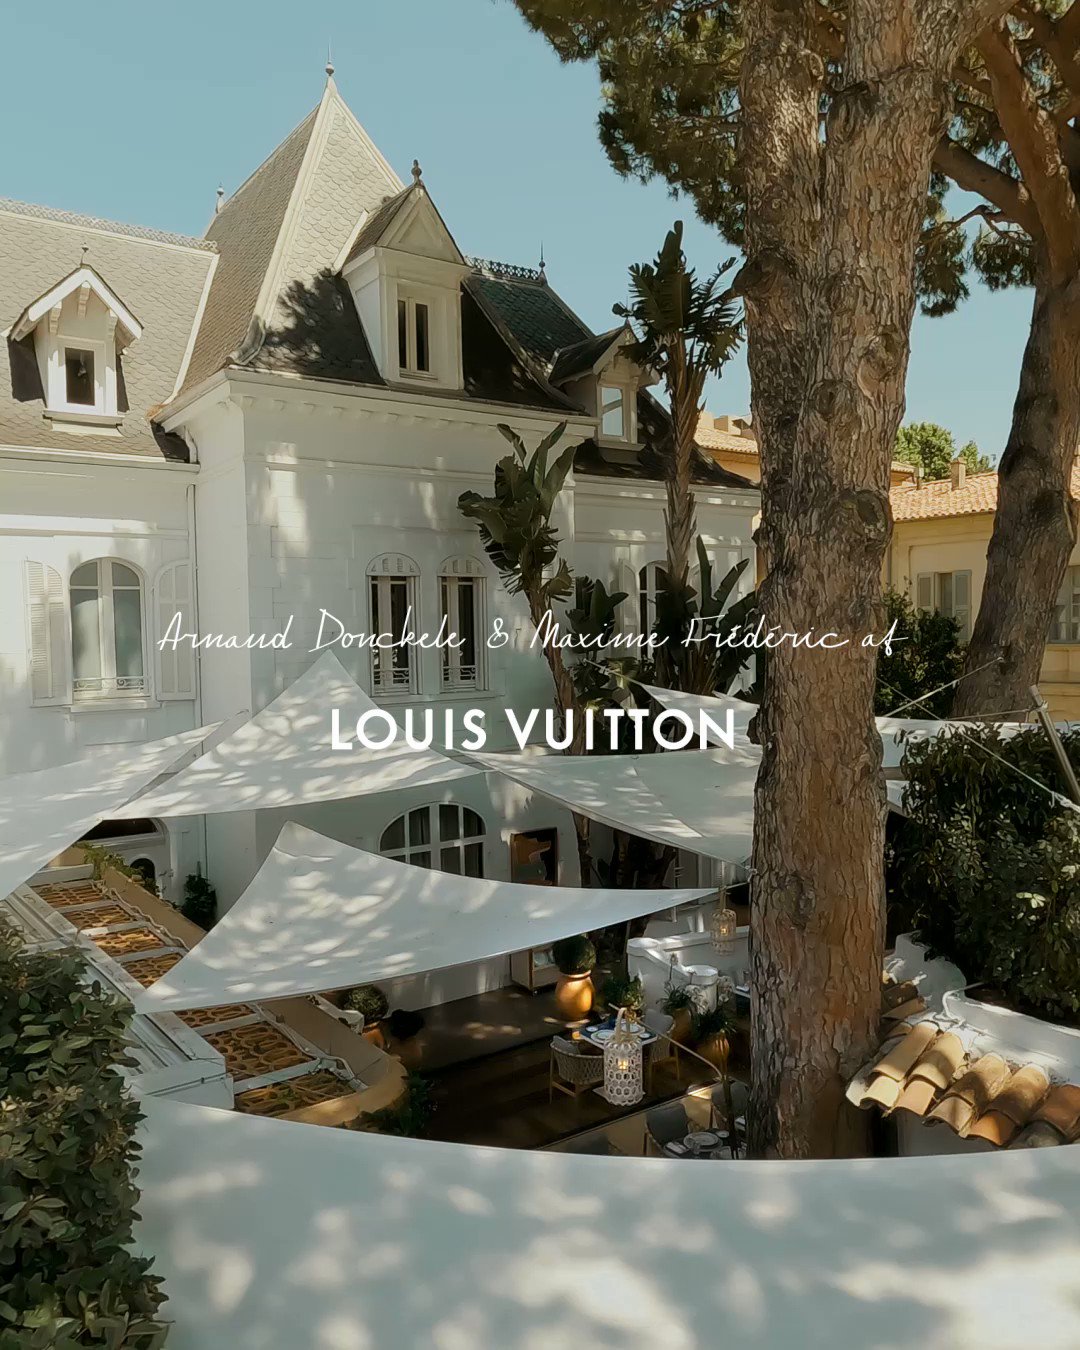 Louis Vuitton on X: This summer, #LouisVuitton has entrusted its Saint-Tropez  restaurant at the White 1921 hotel to #ArnaudDonckele and #MaximeFrederic.  The duo's delectable menu explores the flavors synonymous with the region.